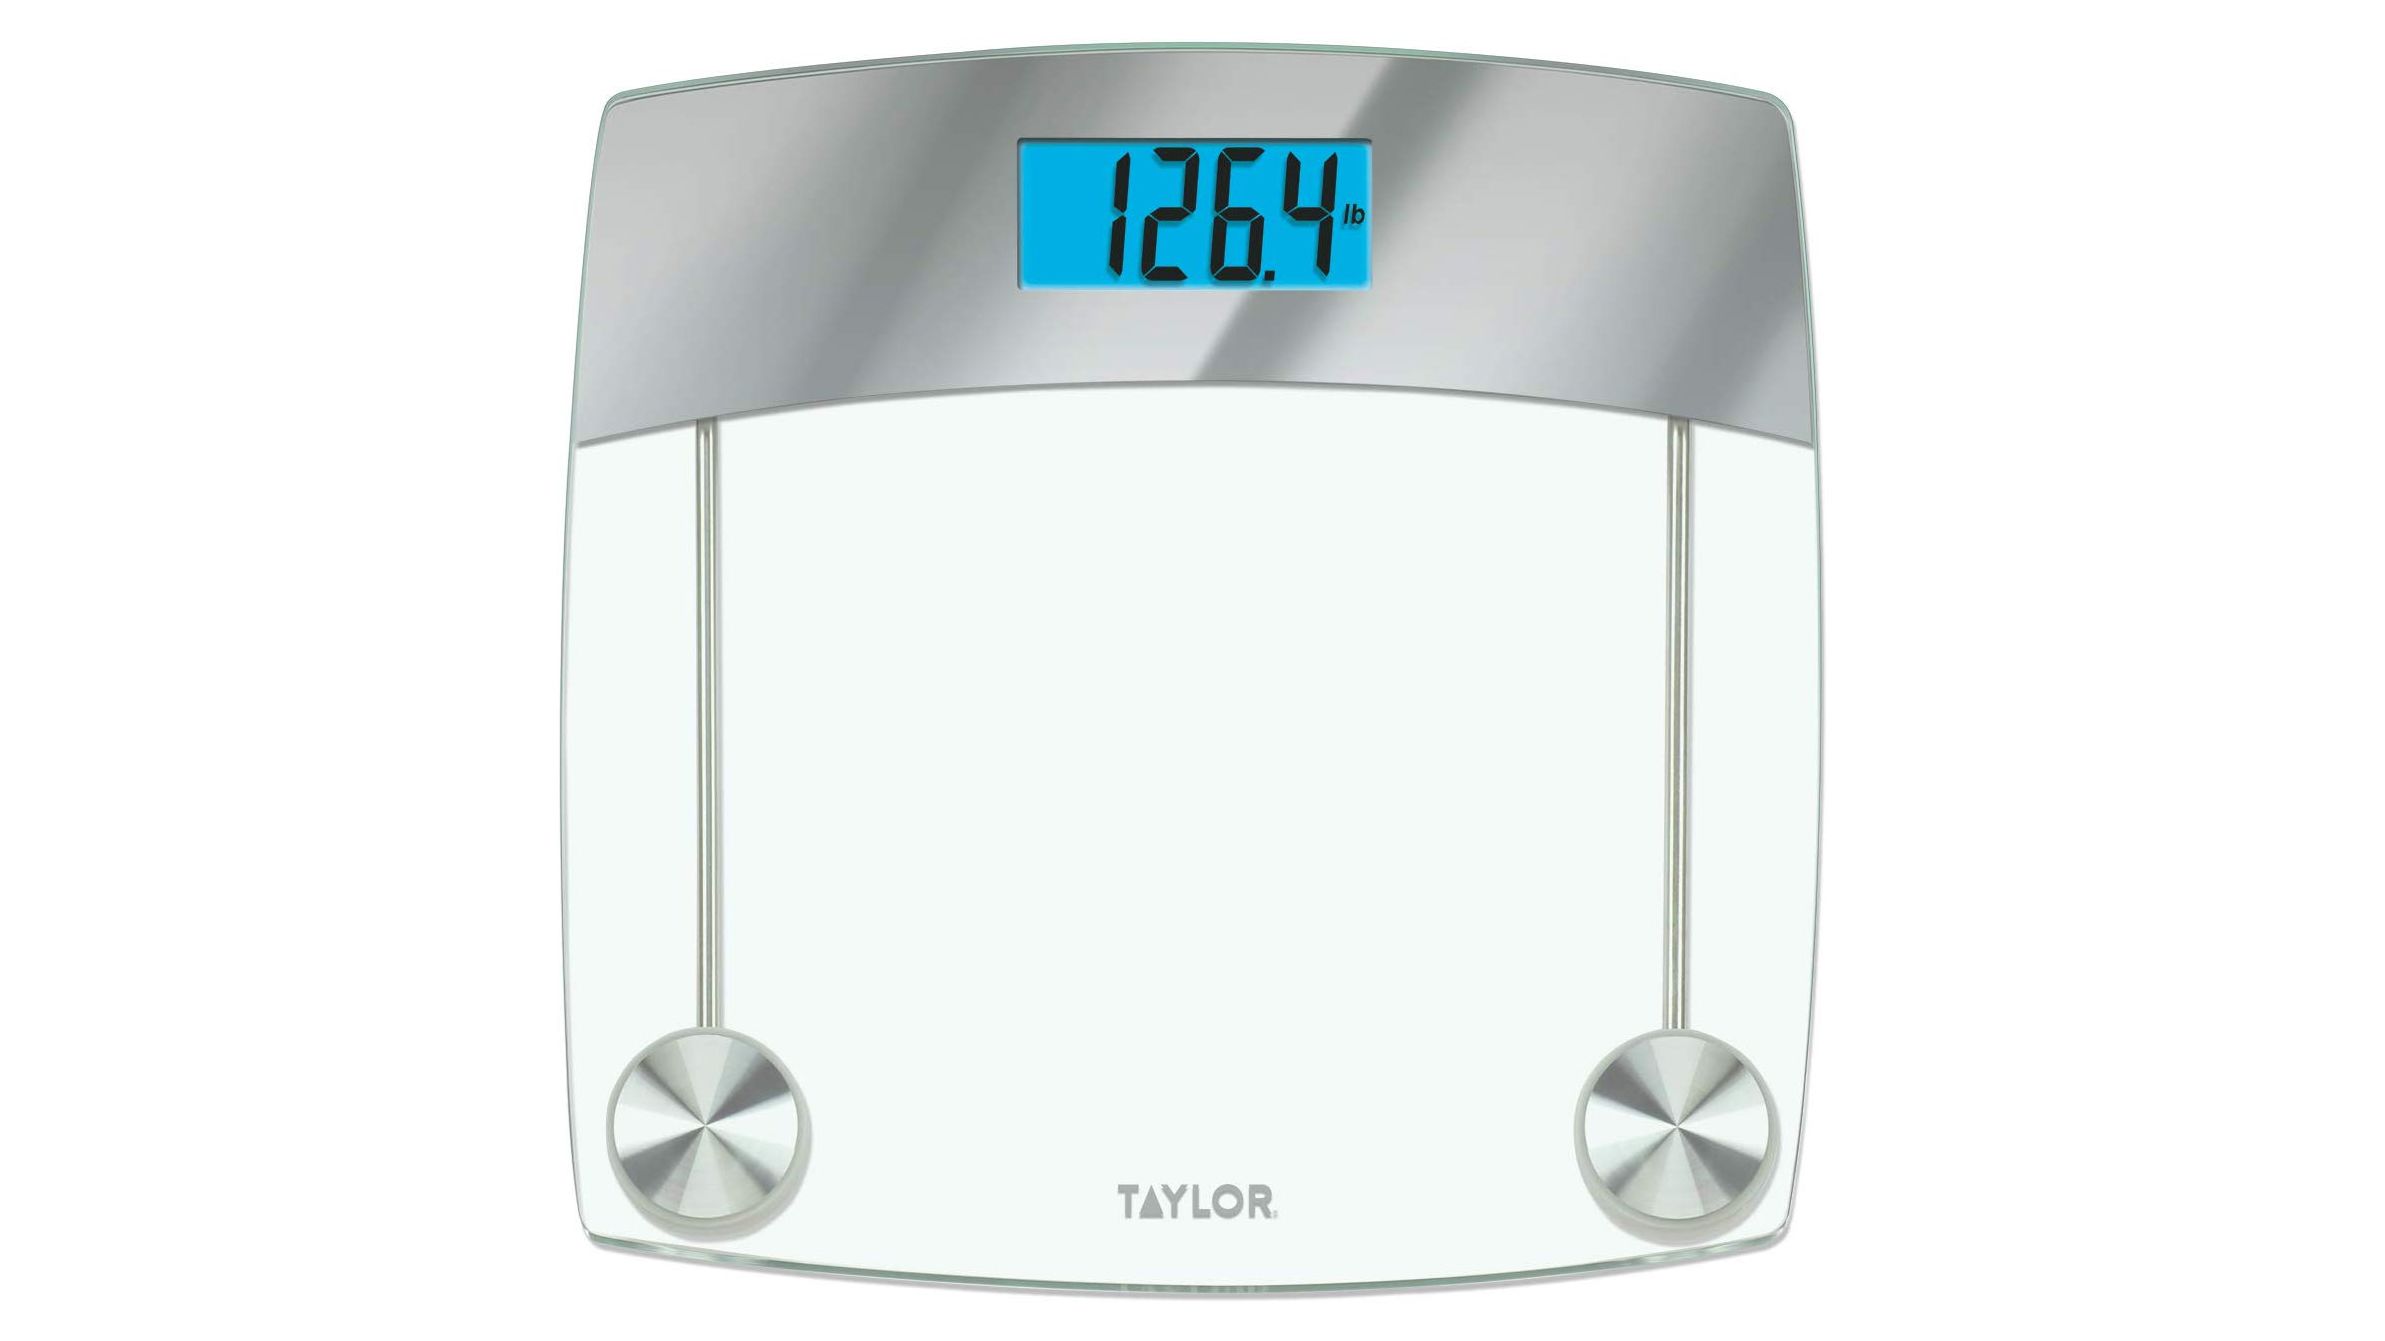 Gadget Daddy: The modest bathroom scale has gone upscale